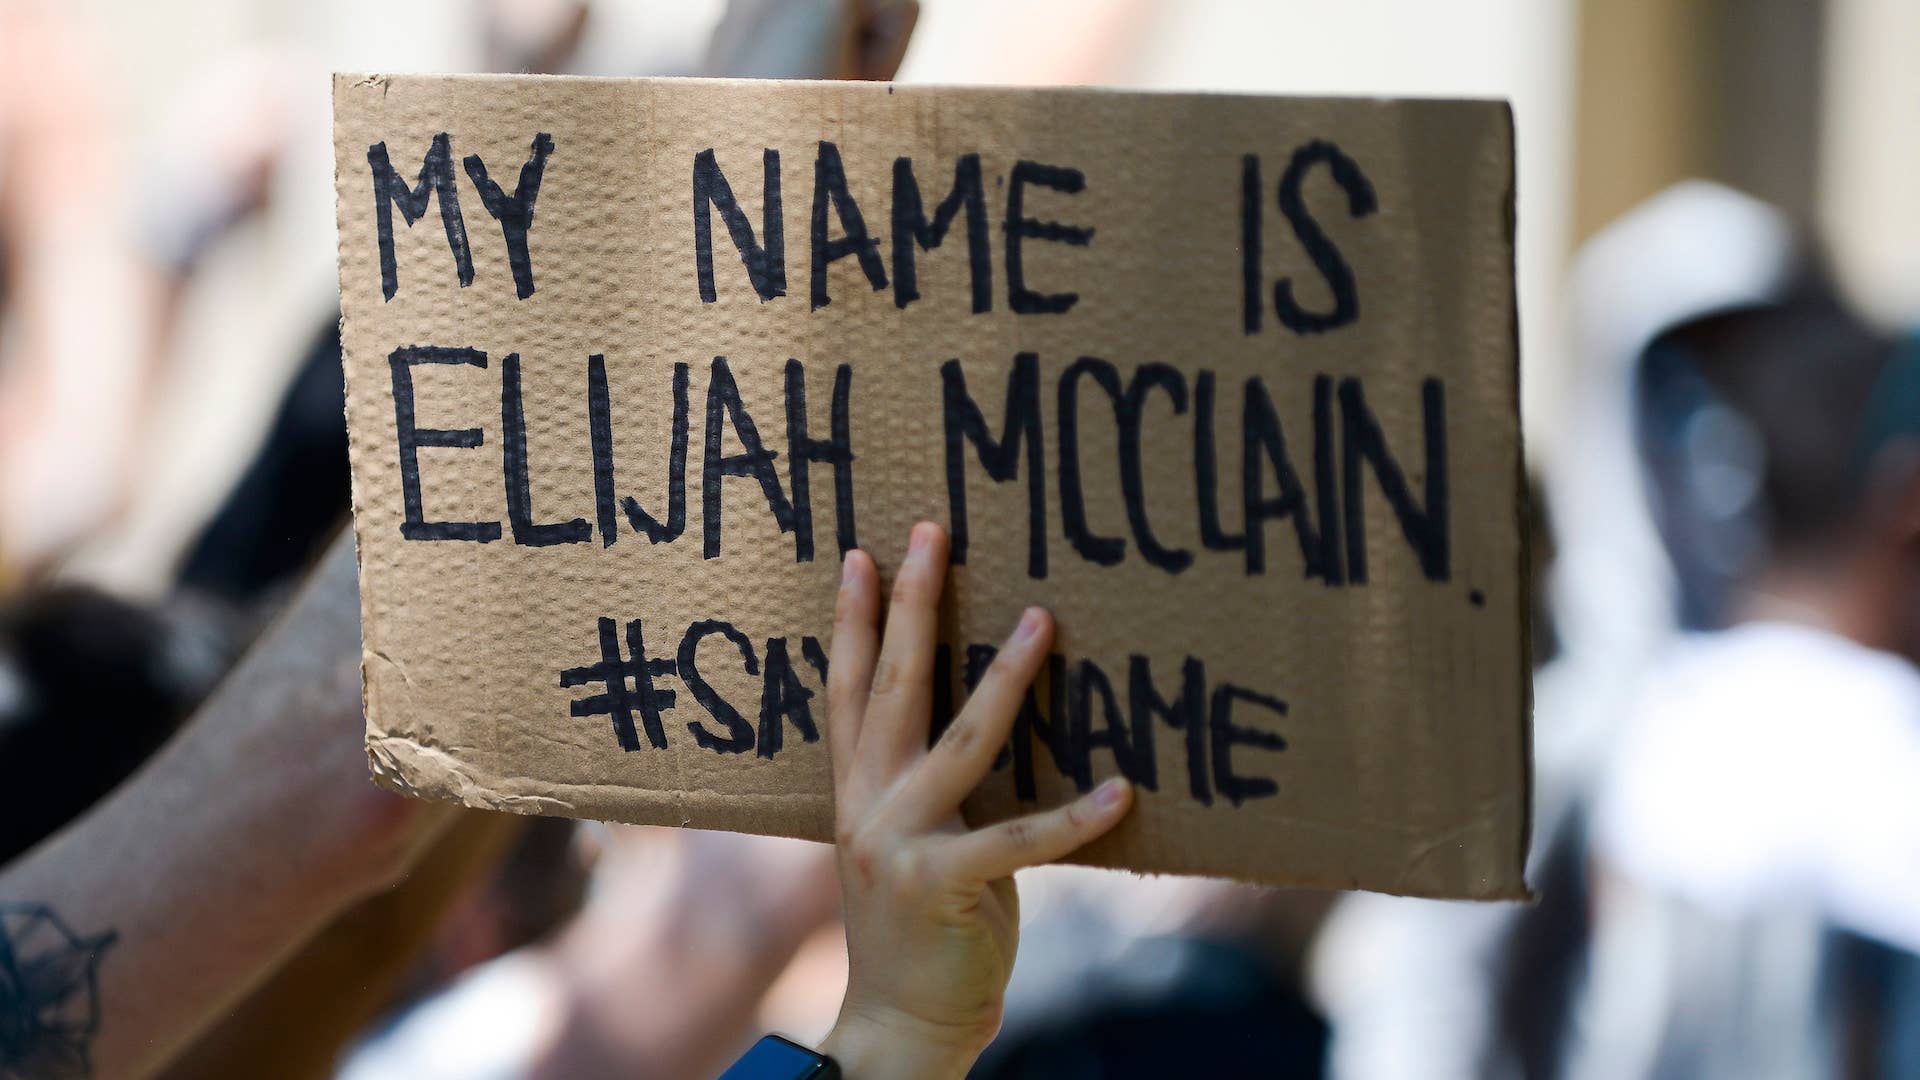 A woman holds sign during rally to demand justice for Elijah McClain.